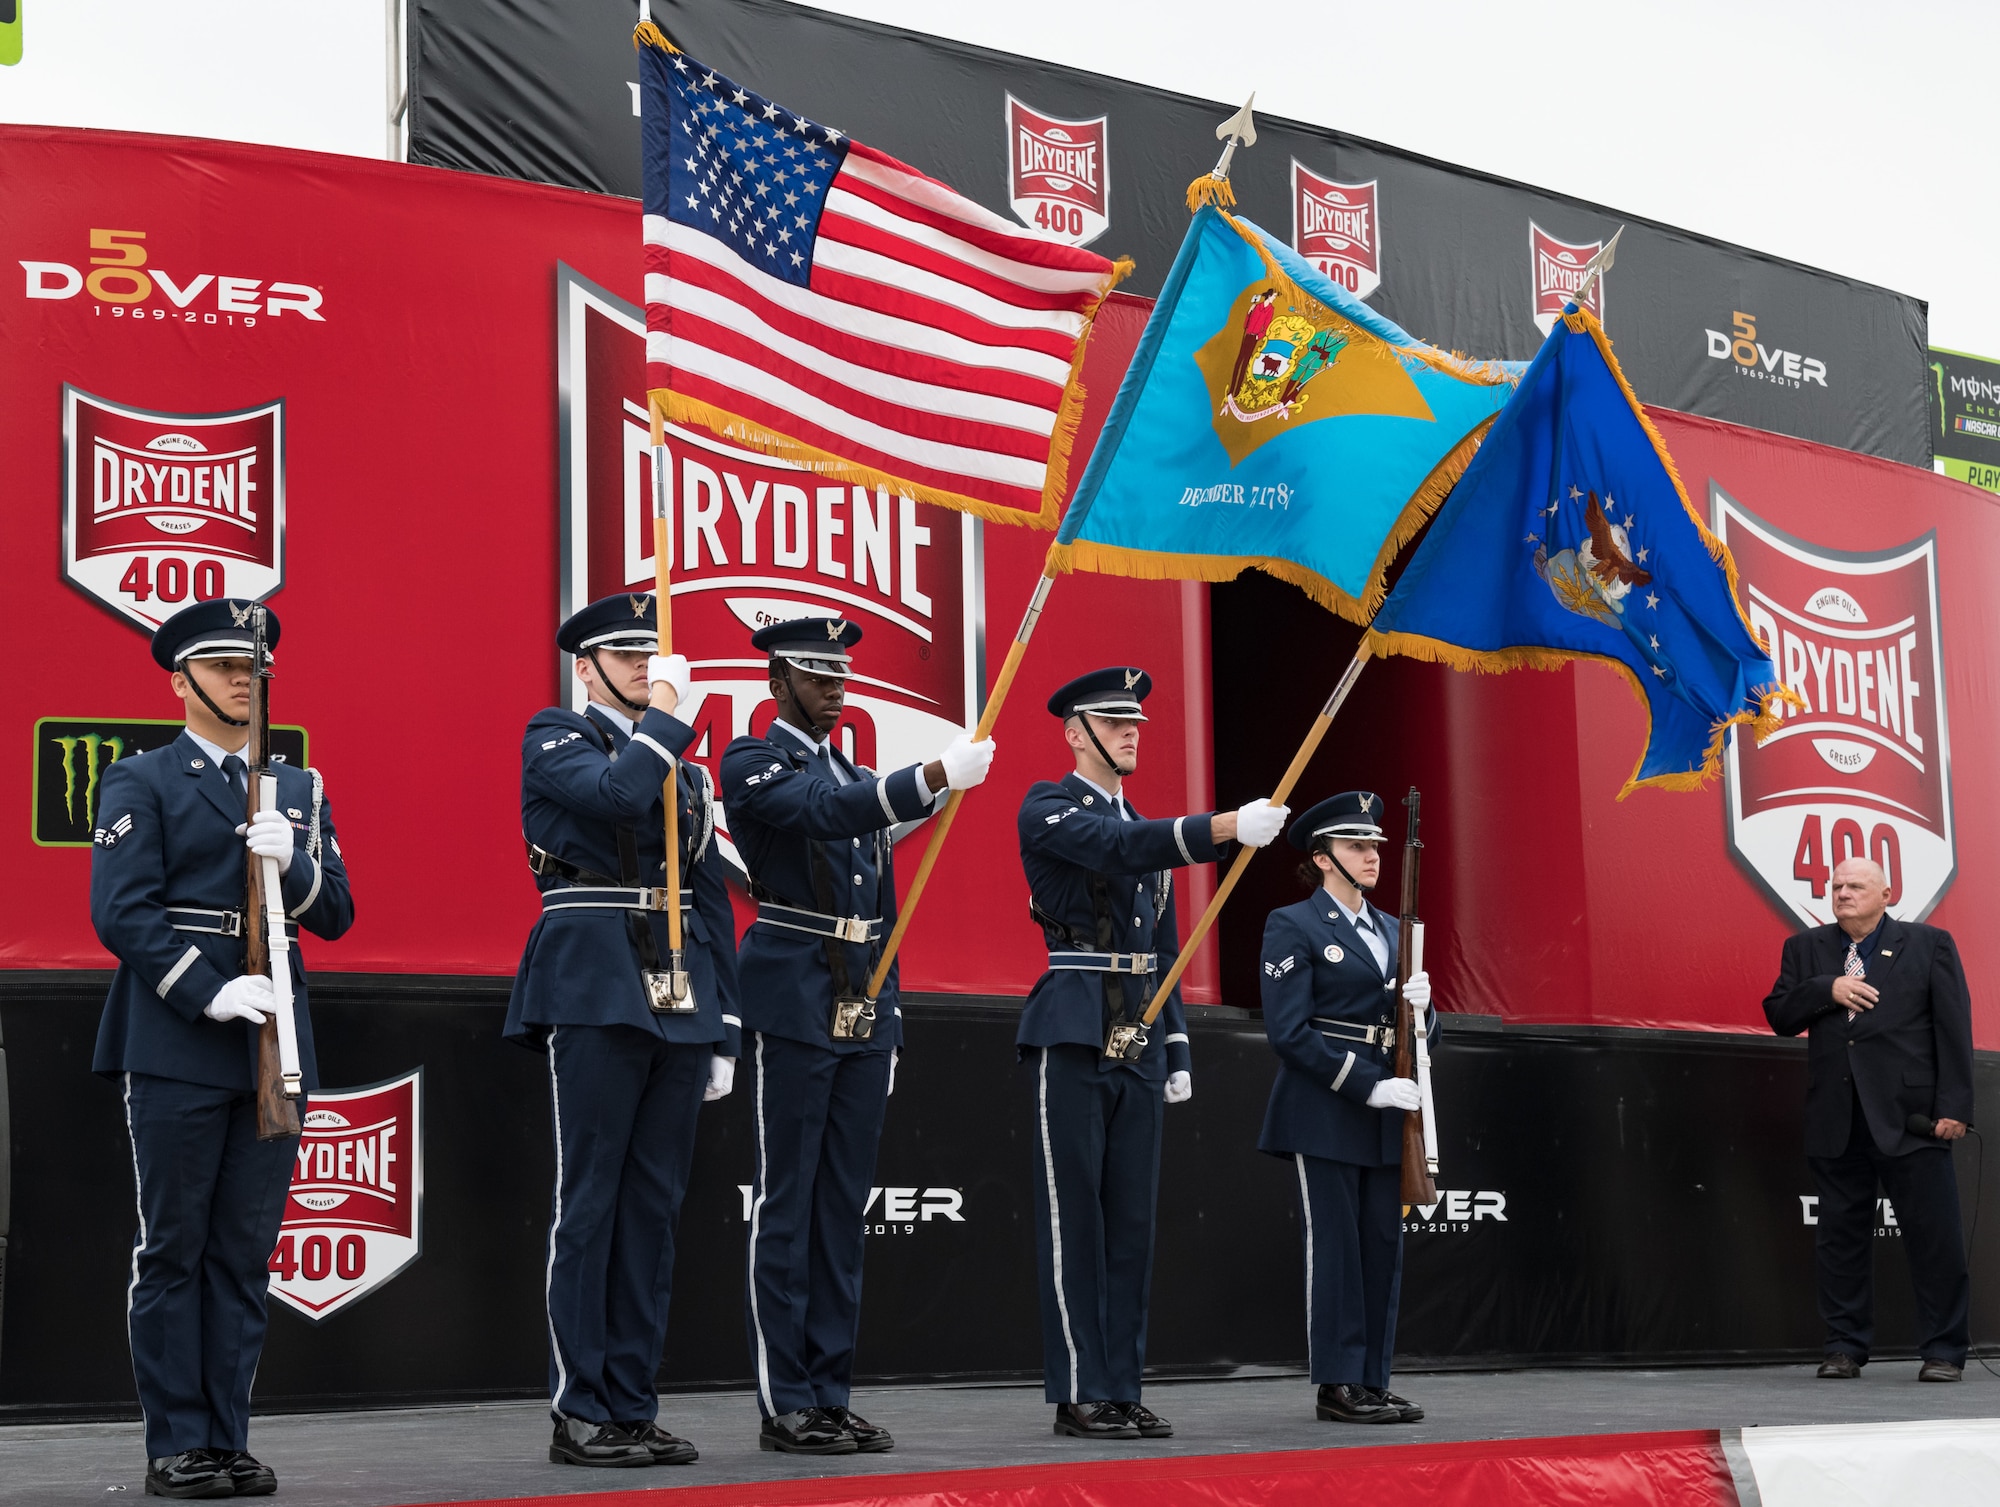 The Dover Air Force Base Honor Guard presents the colors during the opening ceremony of the "Drydene 400" Monster Energy NASCAR Cup Series playoff race Oct. 6, 2019 at Dover International Speedway, Dover, Del. Team Dover members participated in DIS's 50th Anniversary celebration and the 100th NASCAR Cup Series race in the track's history. (U.S. Air Force photo by Roland Balik)